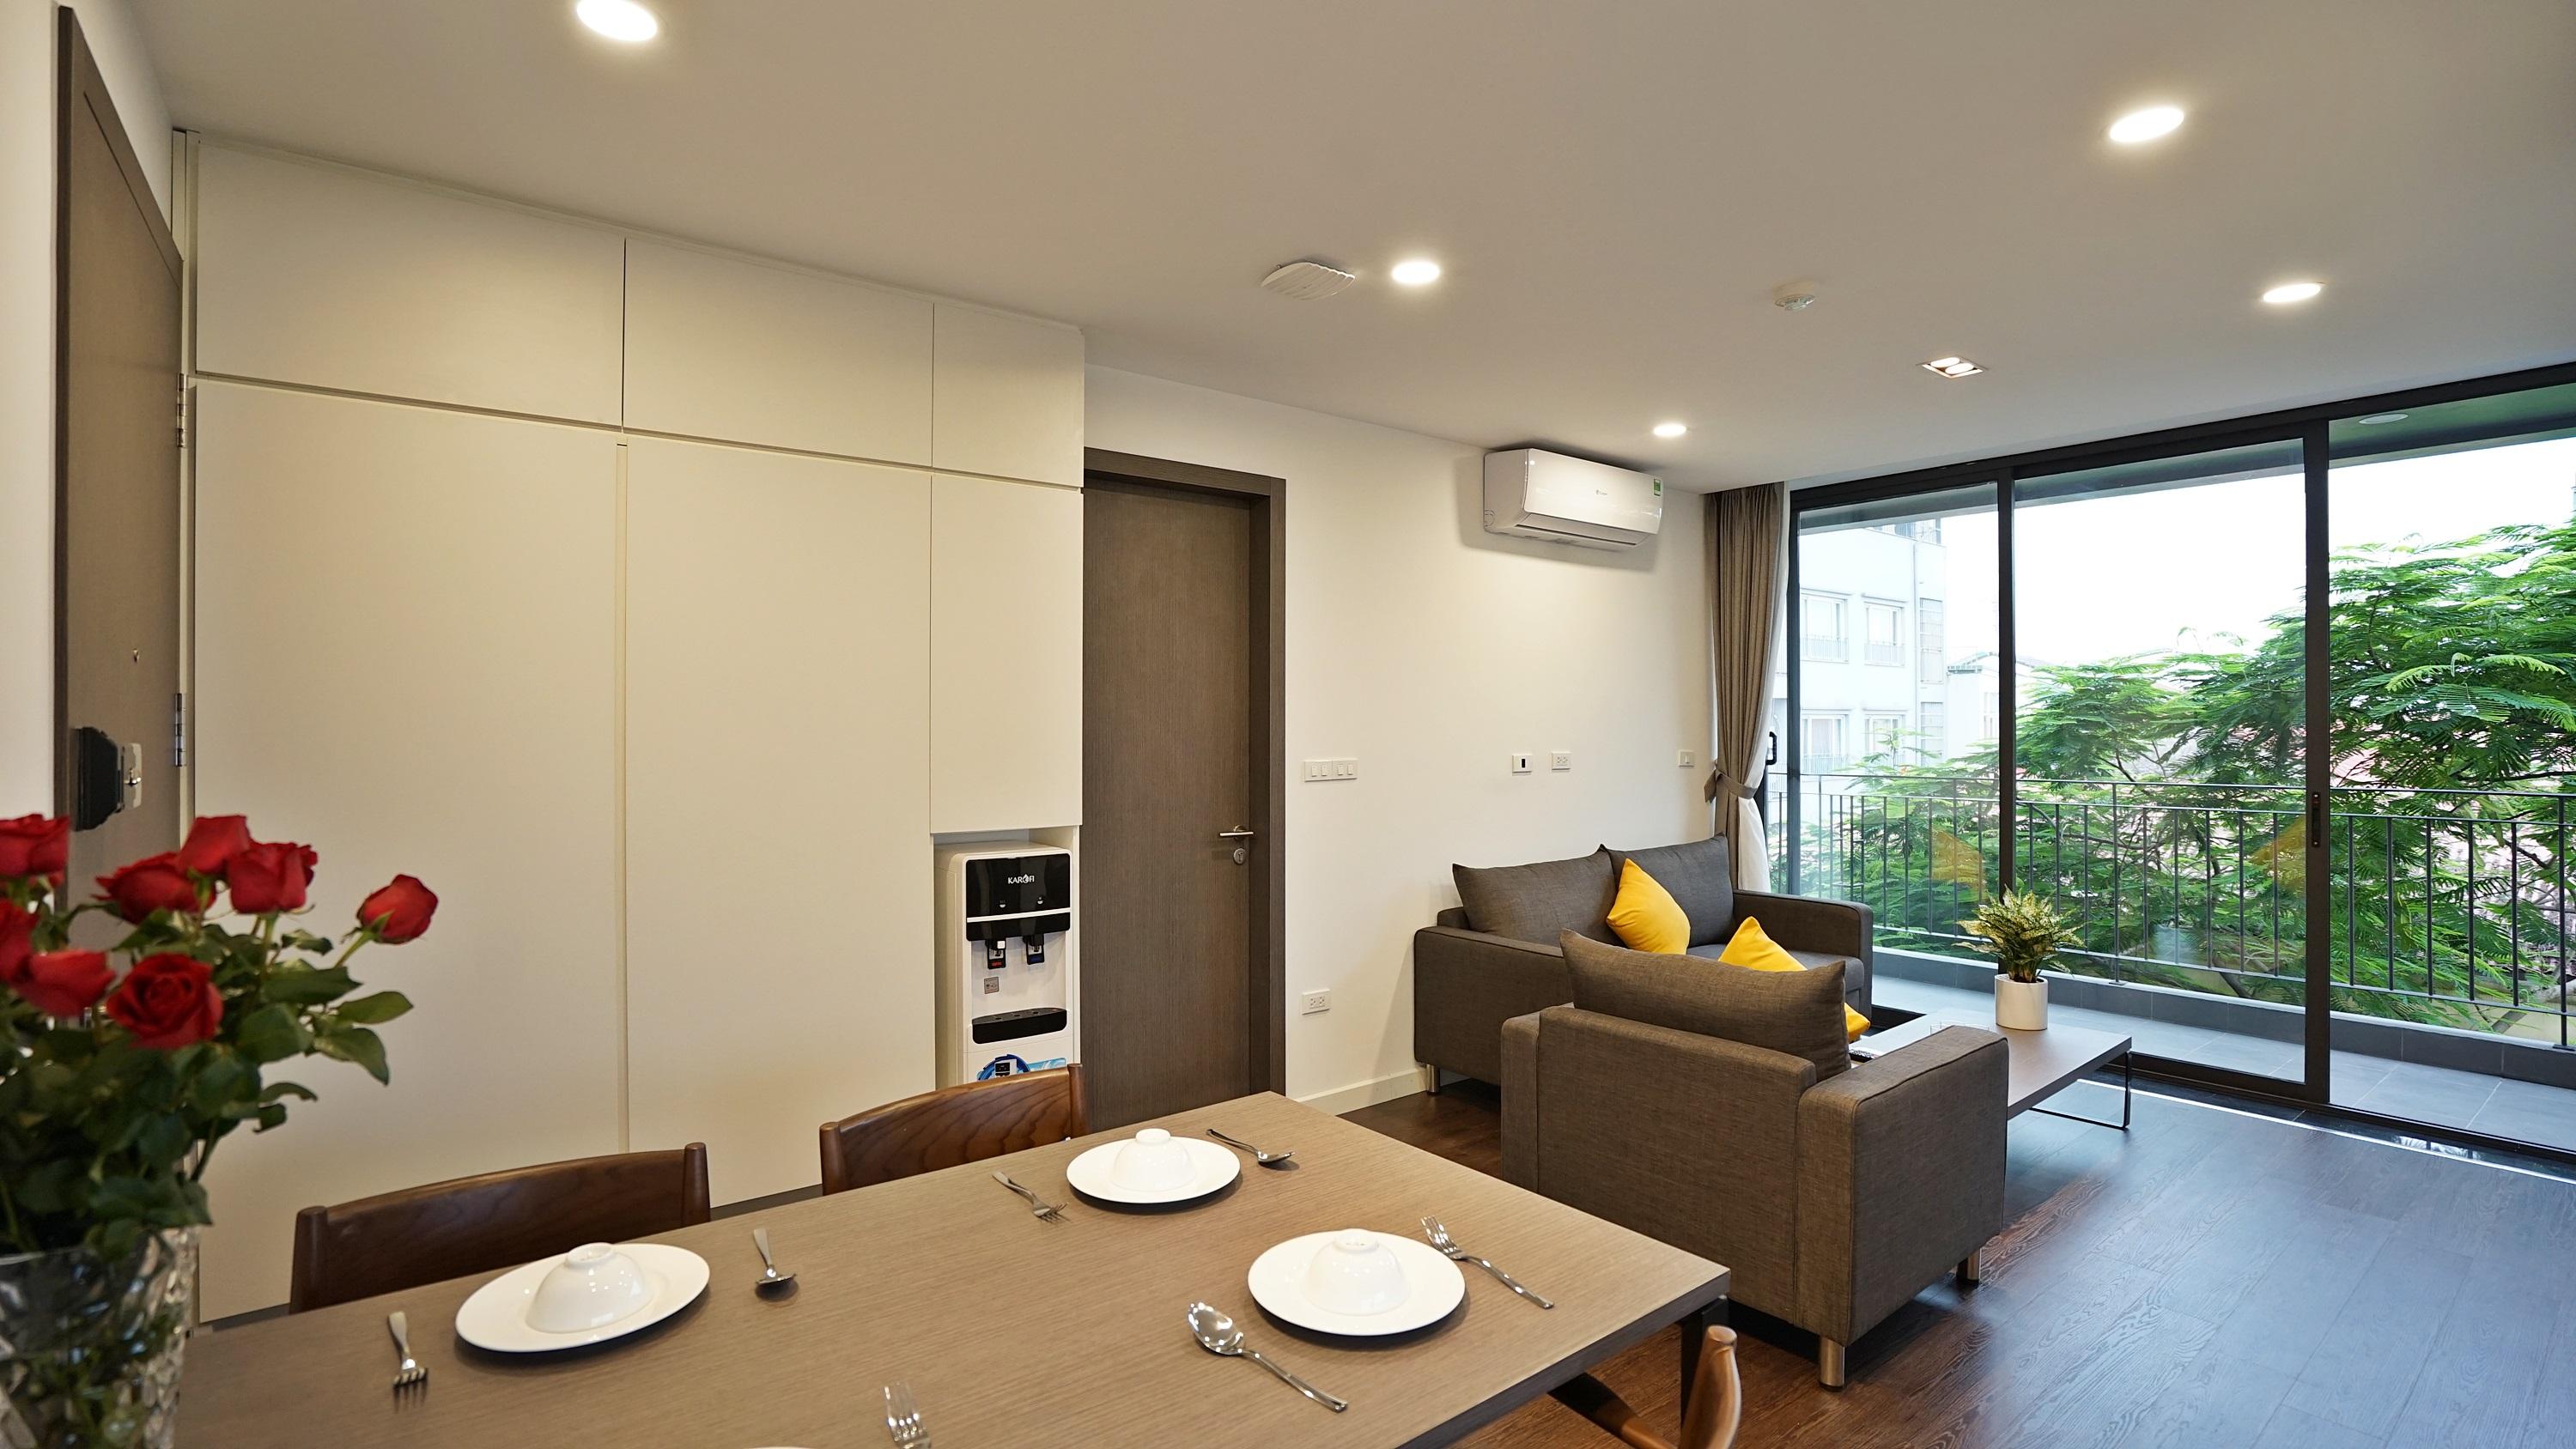 Newly completed one-bedroom apartment in To Ngoc Van str, Tay Ho district